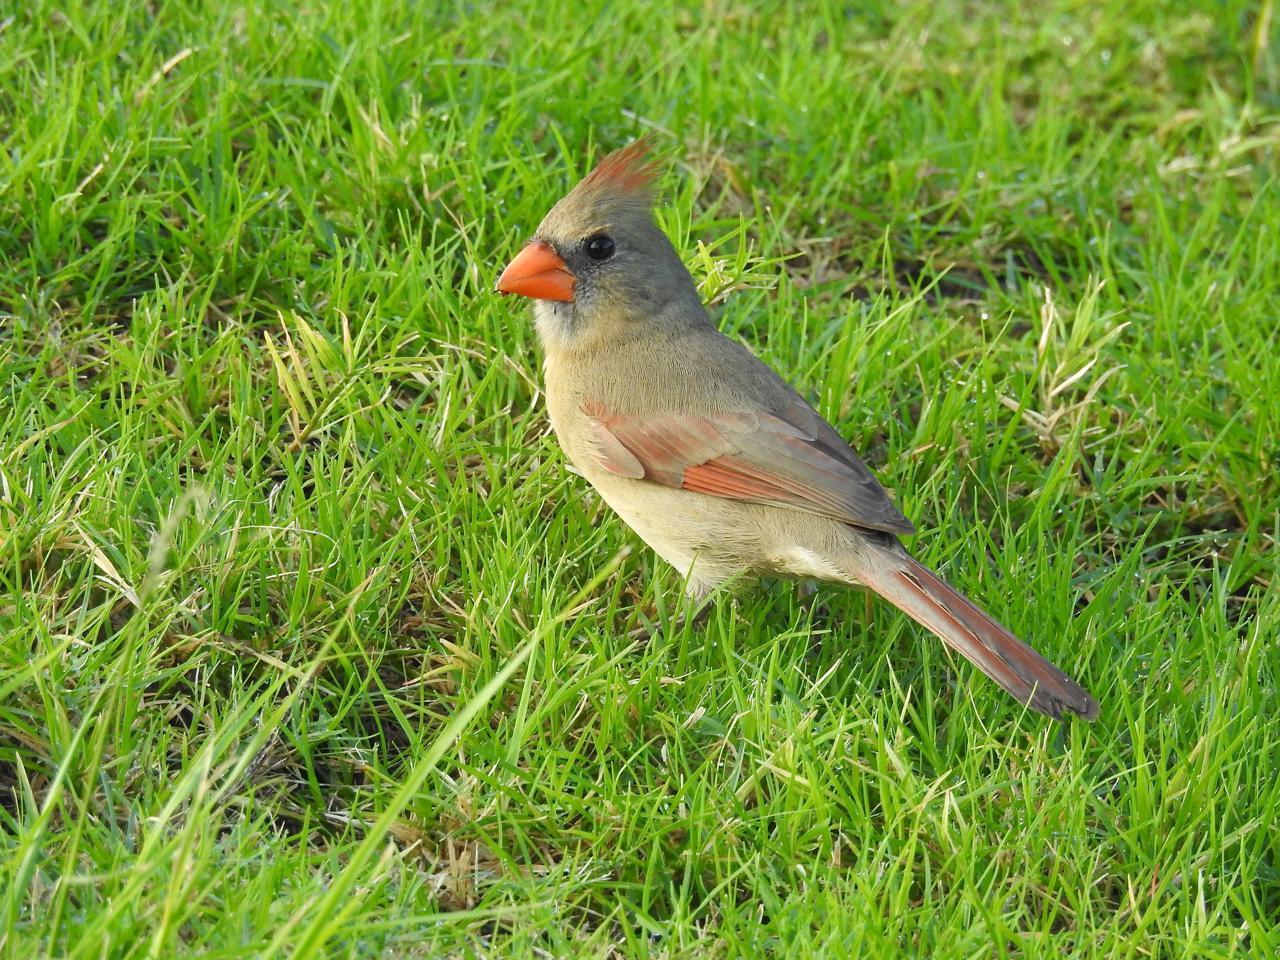 Northern Cardinal Photo by Brian Avent